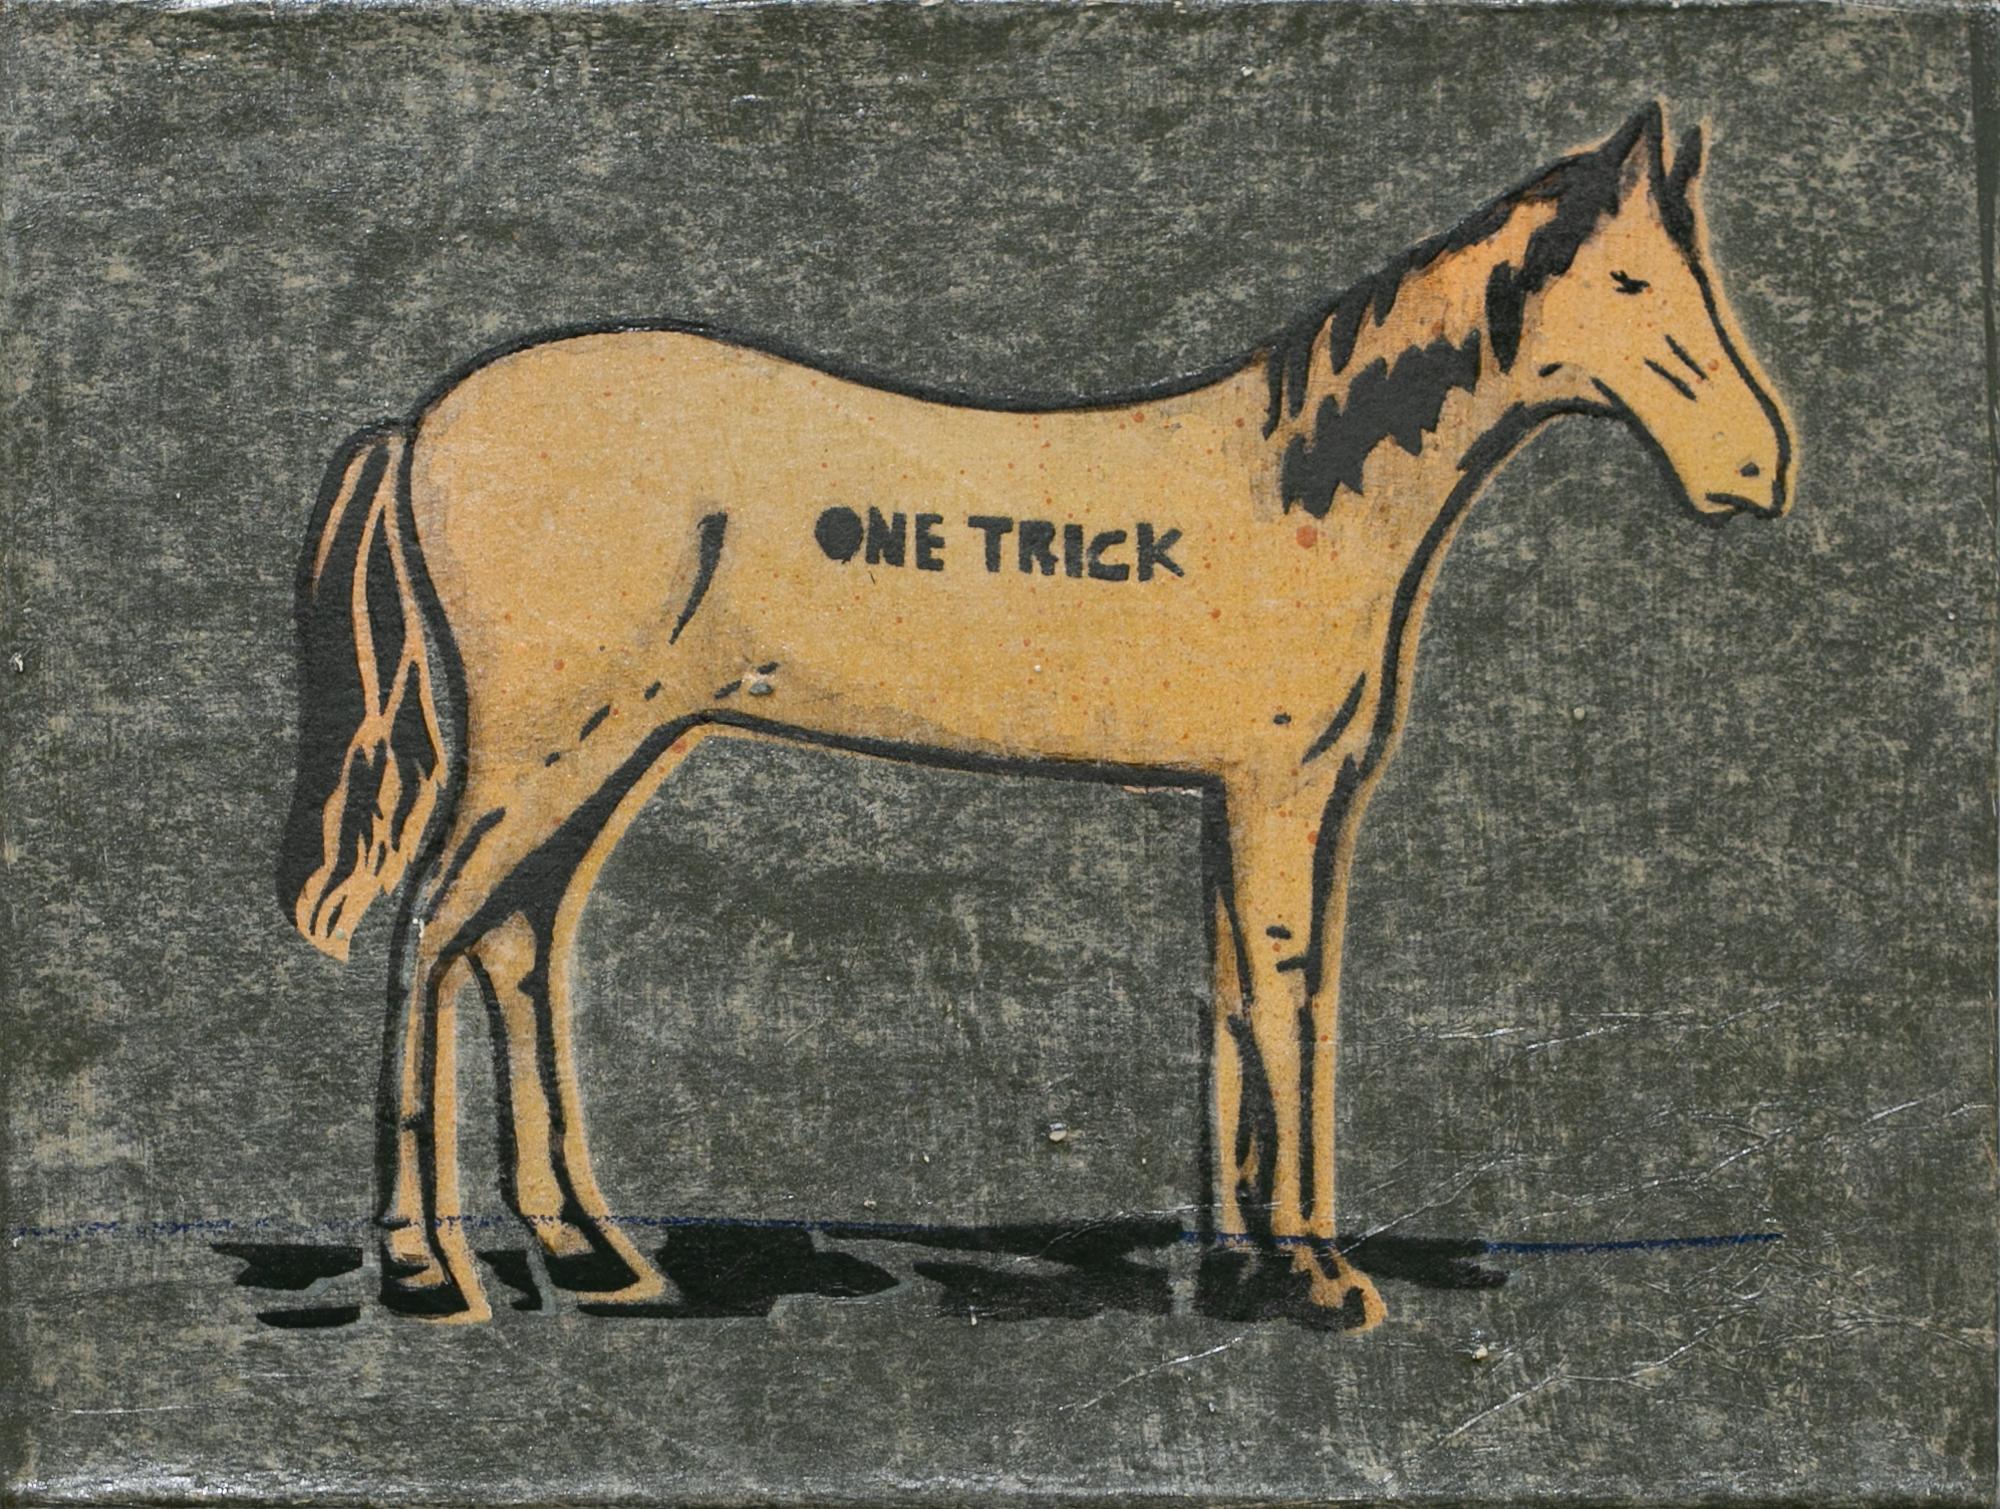 Amanda Marie Animal Painting - "A Little Trick", One Trick Pony, Horse Painting, Acrylic and Spray Paint, Text